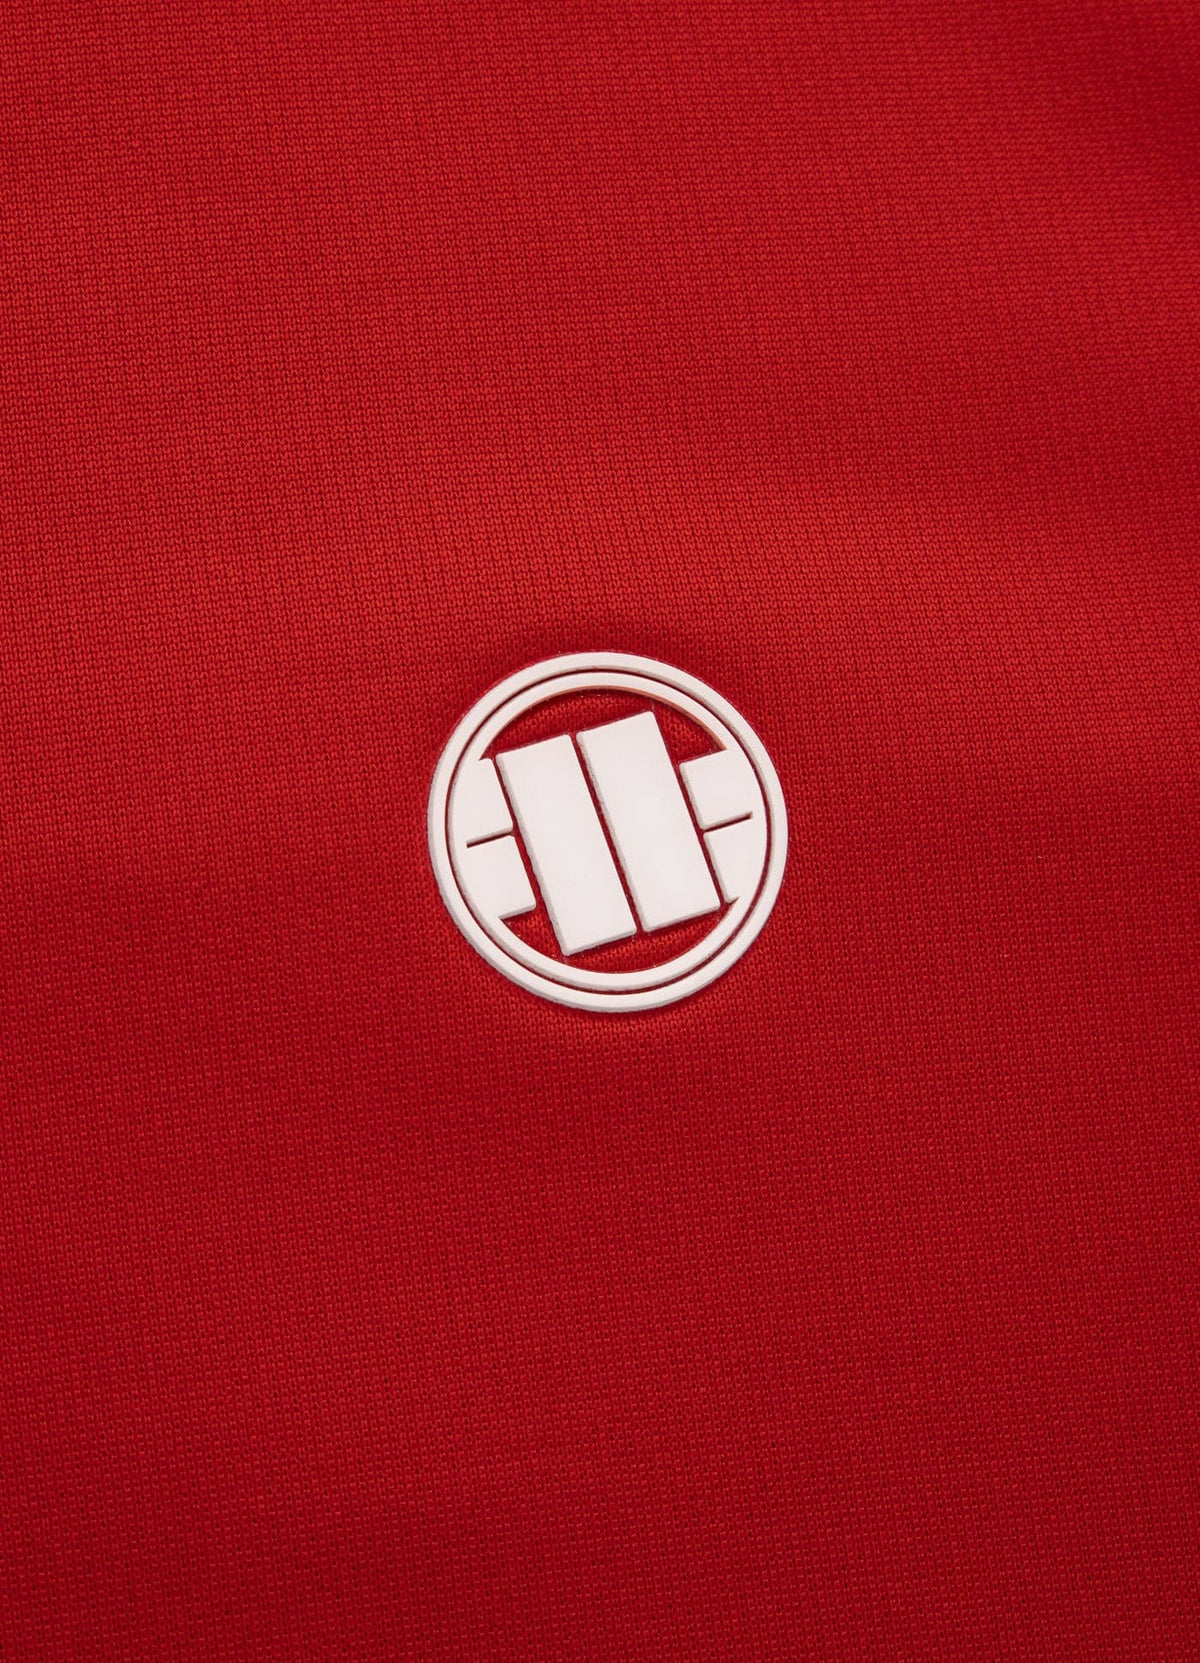 Small Logo Oldschool Red Track Jacket.